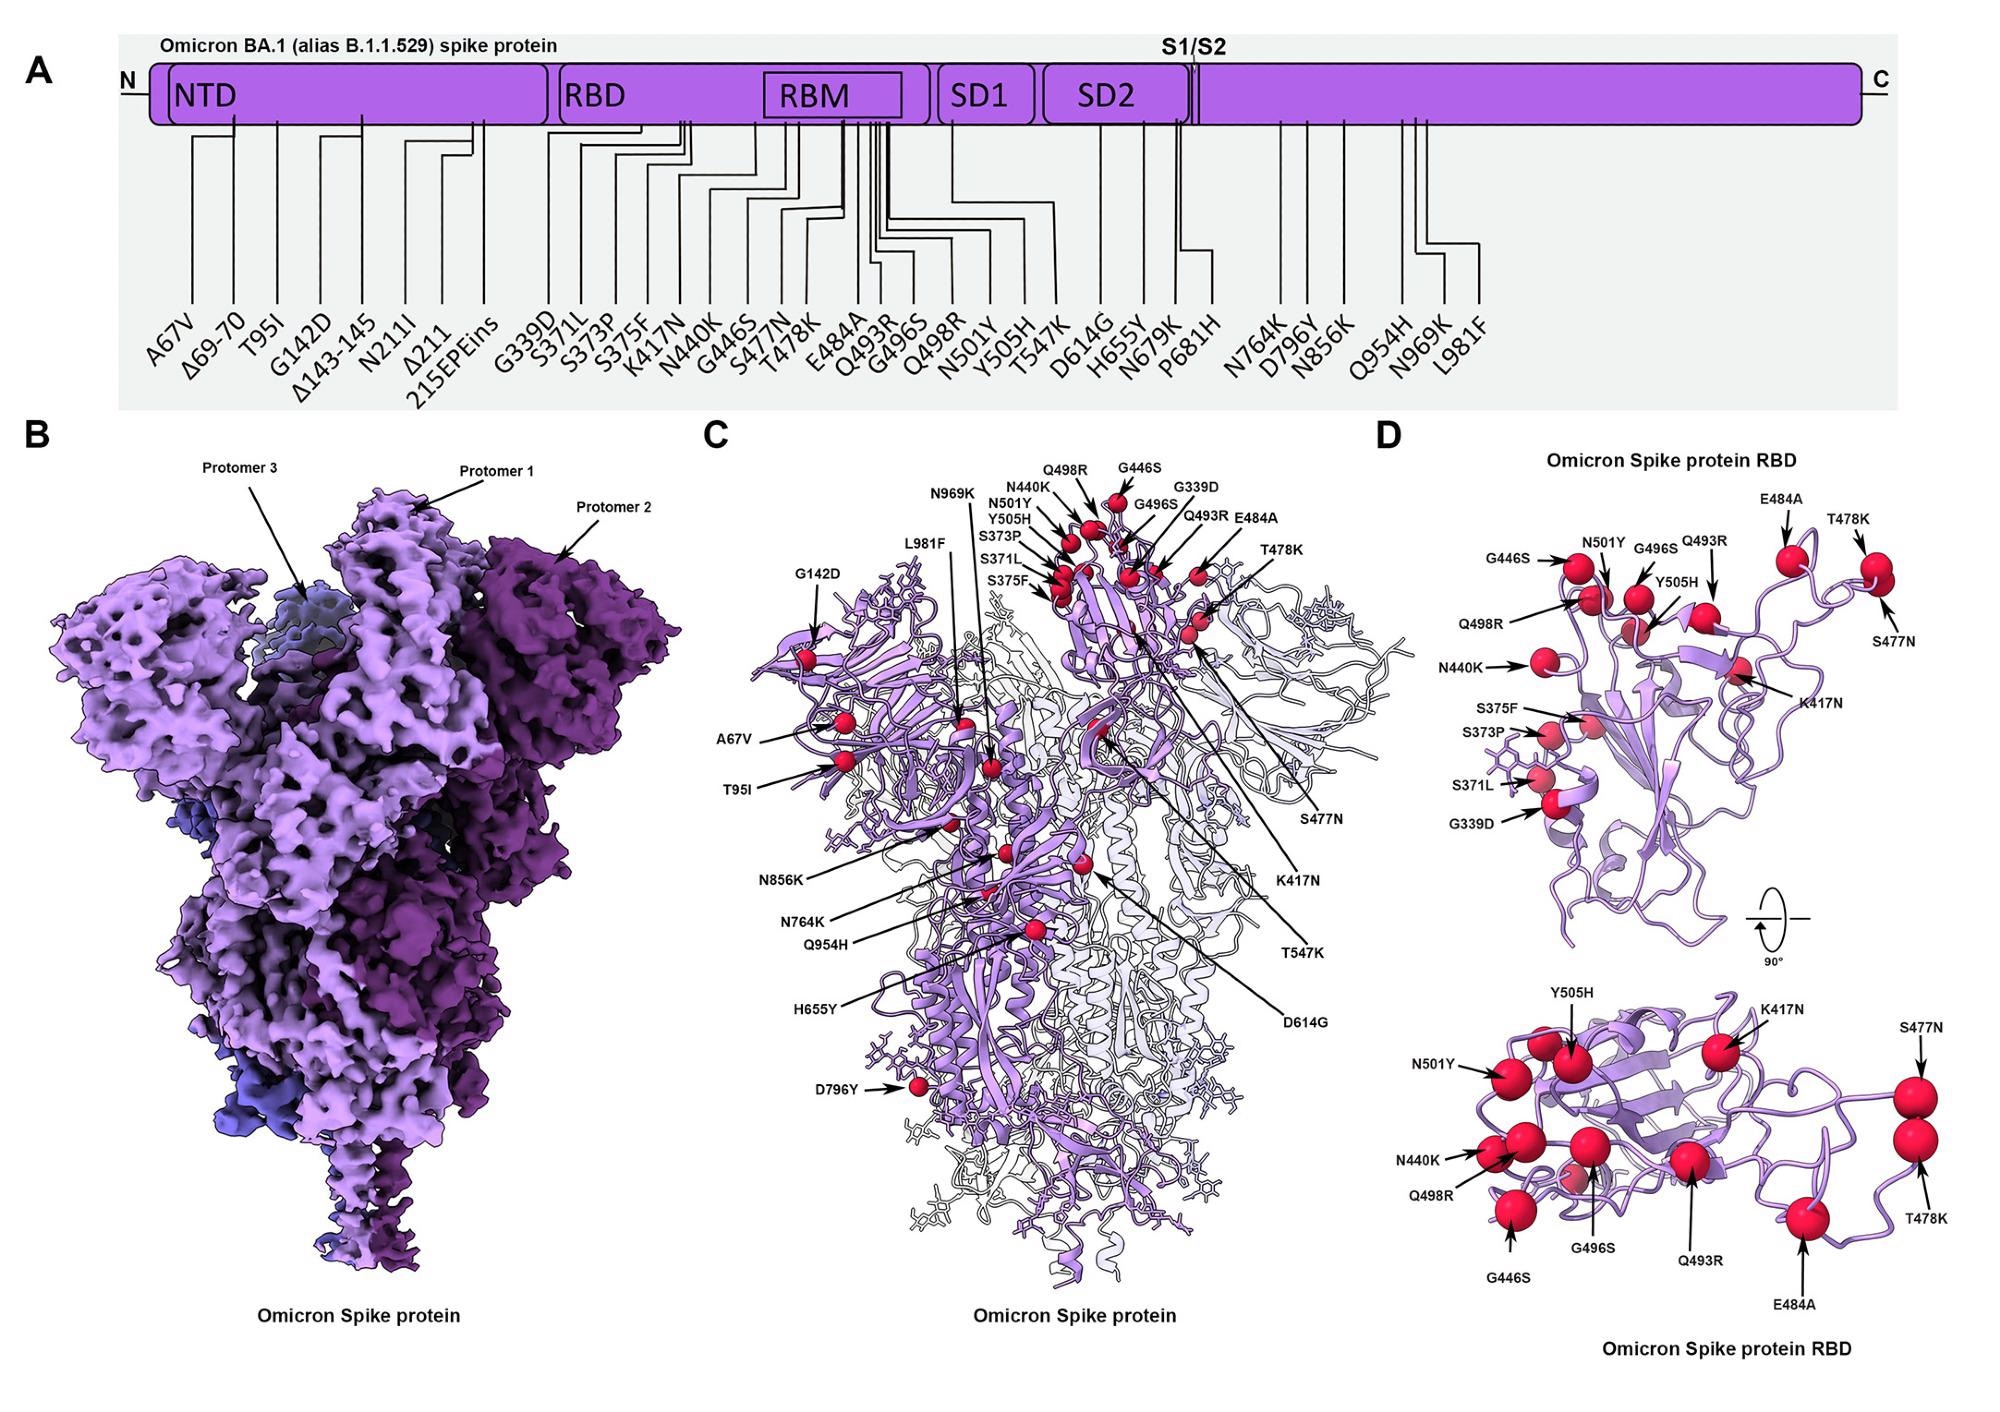 Cryo-EM structure of the Omicron spike protein.(A) A schematic diagram illustrating the domain arrangement of the spike protein. Mutations present in the Omicron variant spike protein are labeled. (B) Cryo-EM map of the Omicron spike protein at 2.79 Å resolution. Protomers are colored in different shades of purple. (C) Cryo-EM structure of Omicron spike protein indicating the locations of modeled mutations on one protomer. (D) The Omicron spike receptor-binding domain (RBD) shown in two orthogonal orientations with Cα positions of the mutated residues shown as red spheres.